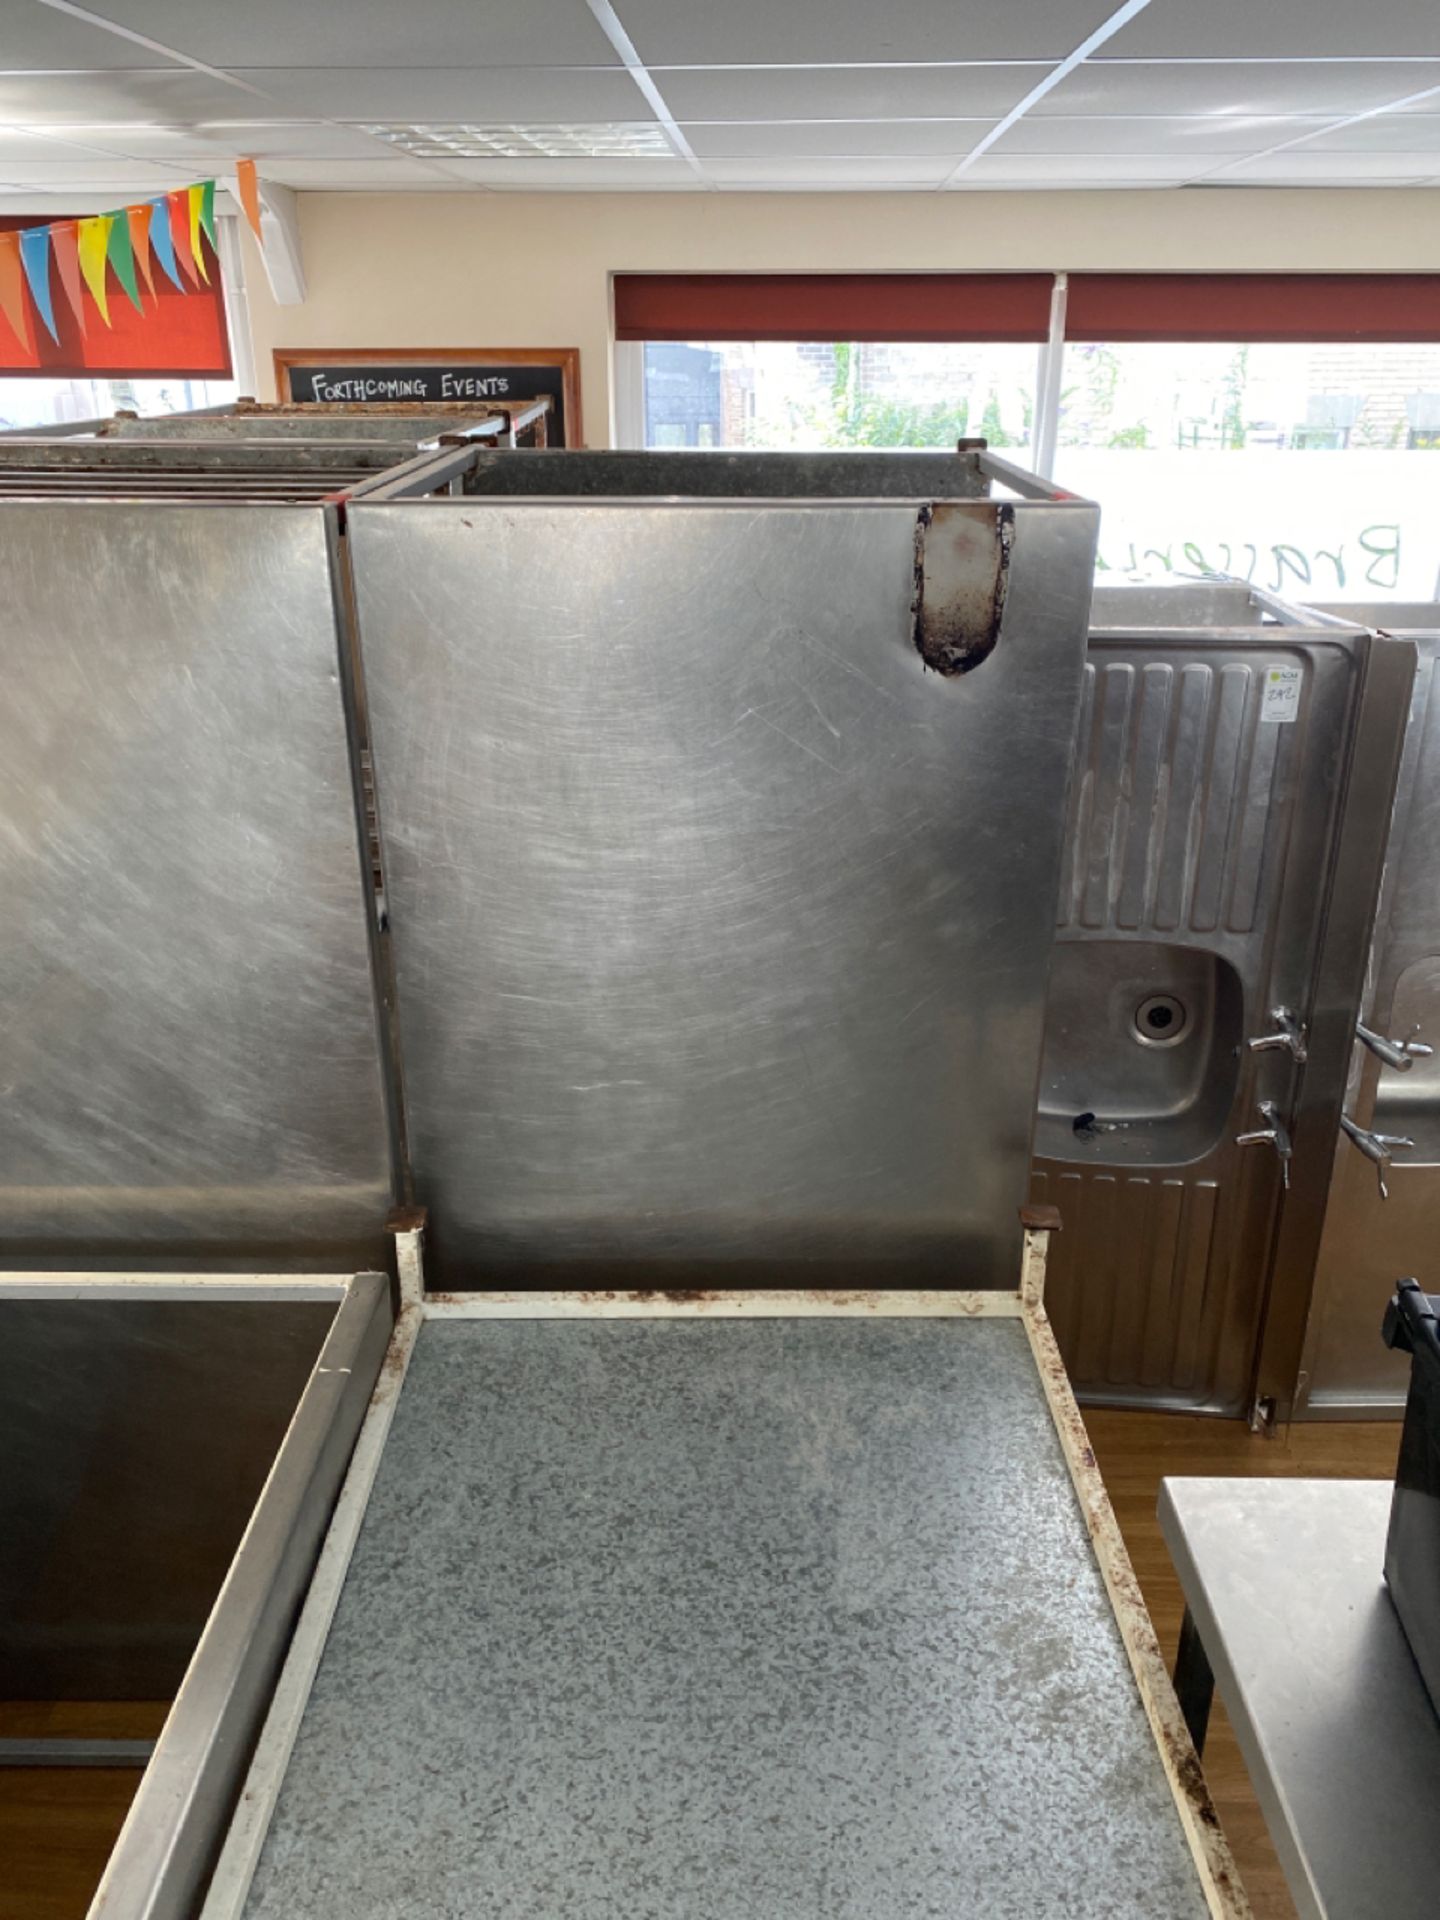 Stainless Steel Topped Preparation Table - Image 6 of 8